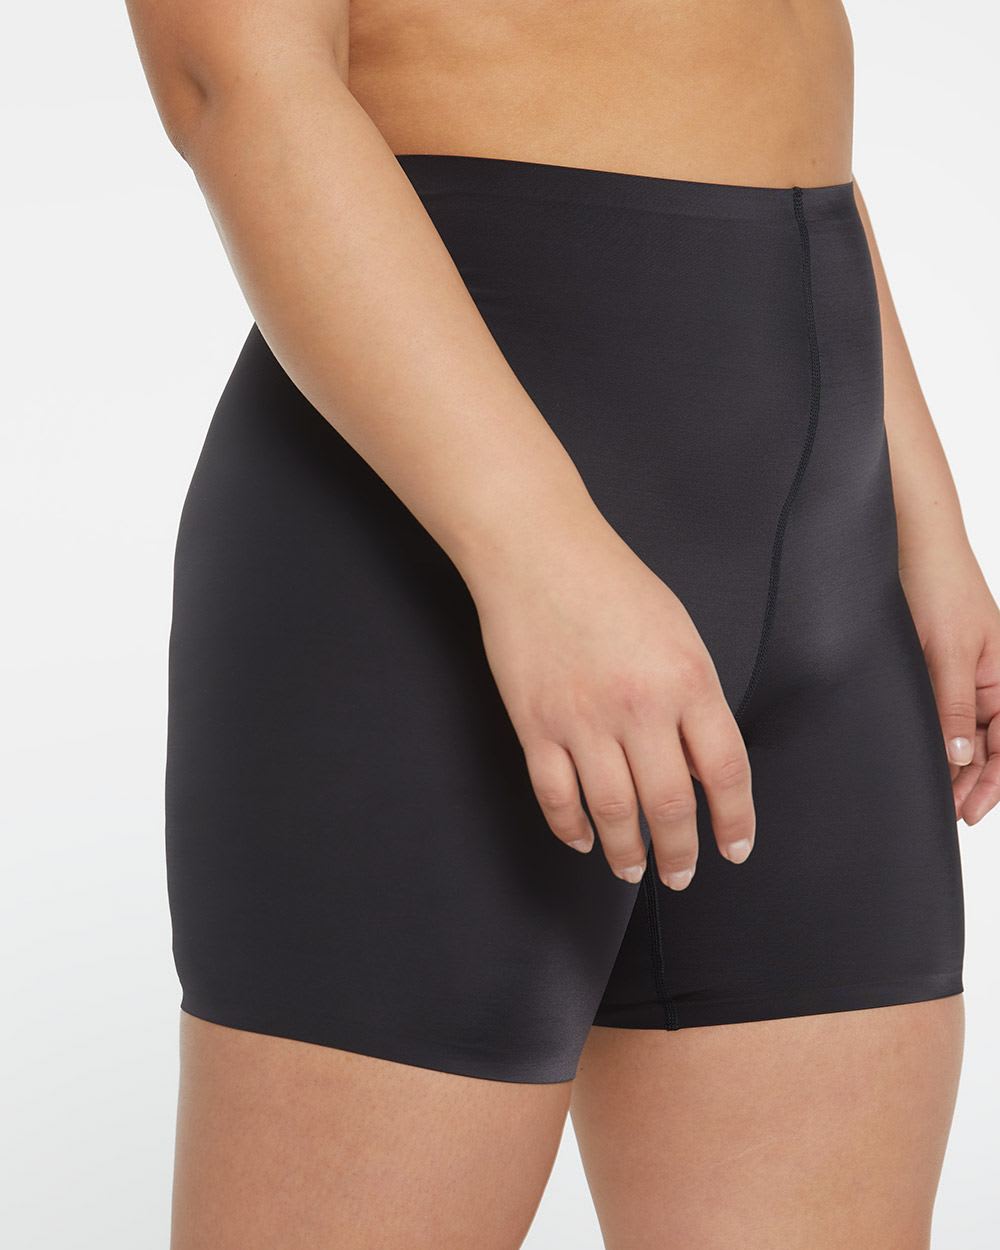 Coolfit Everyday Anti Chafing Shorts